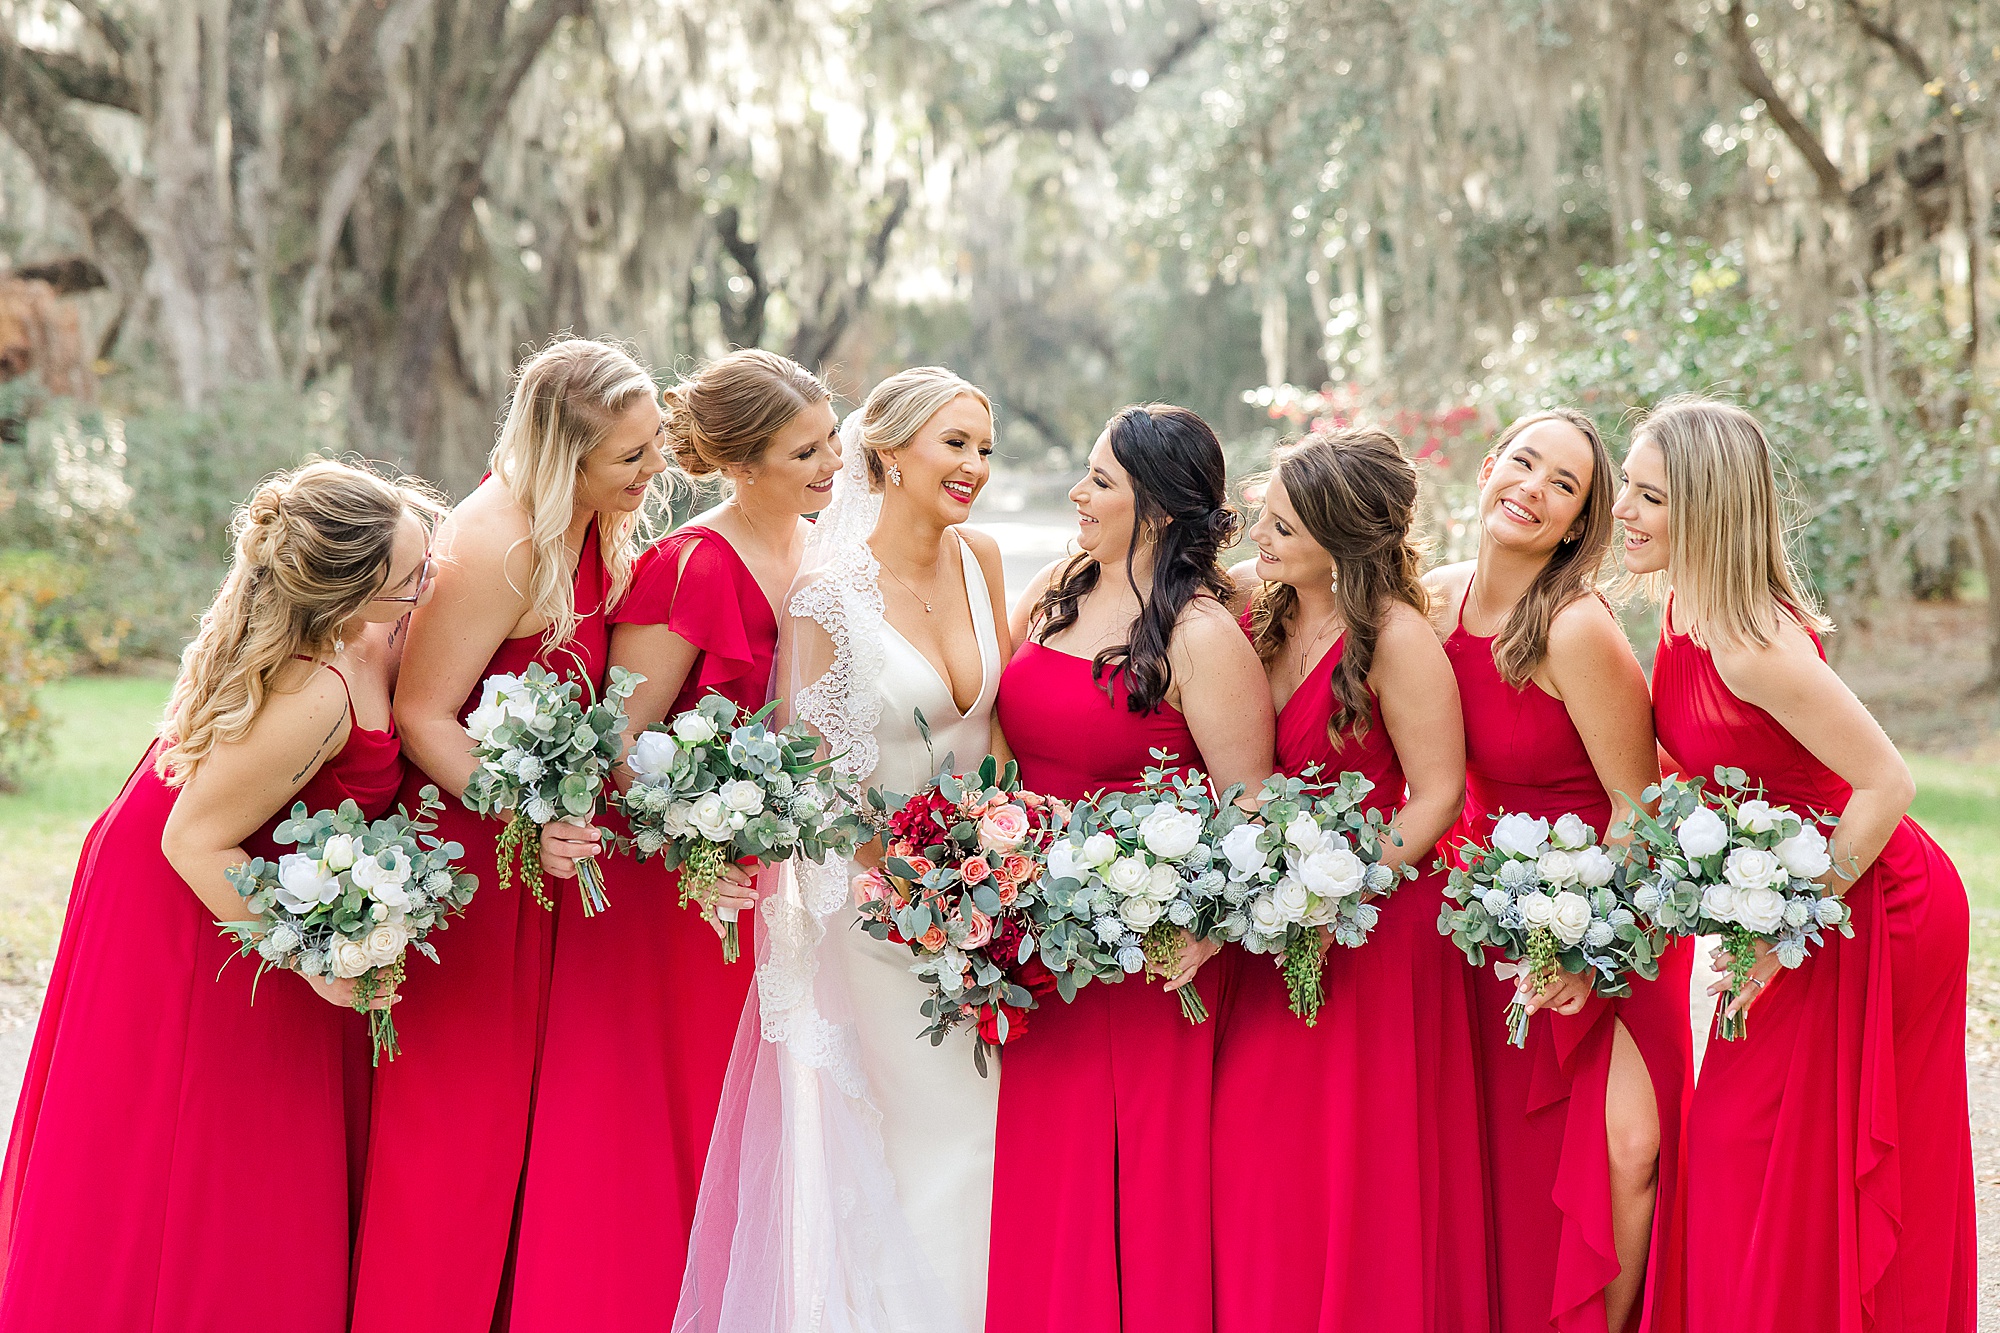 bridesmaids in red dresses and white bouquets stand around bride